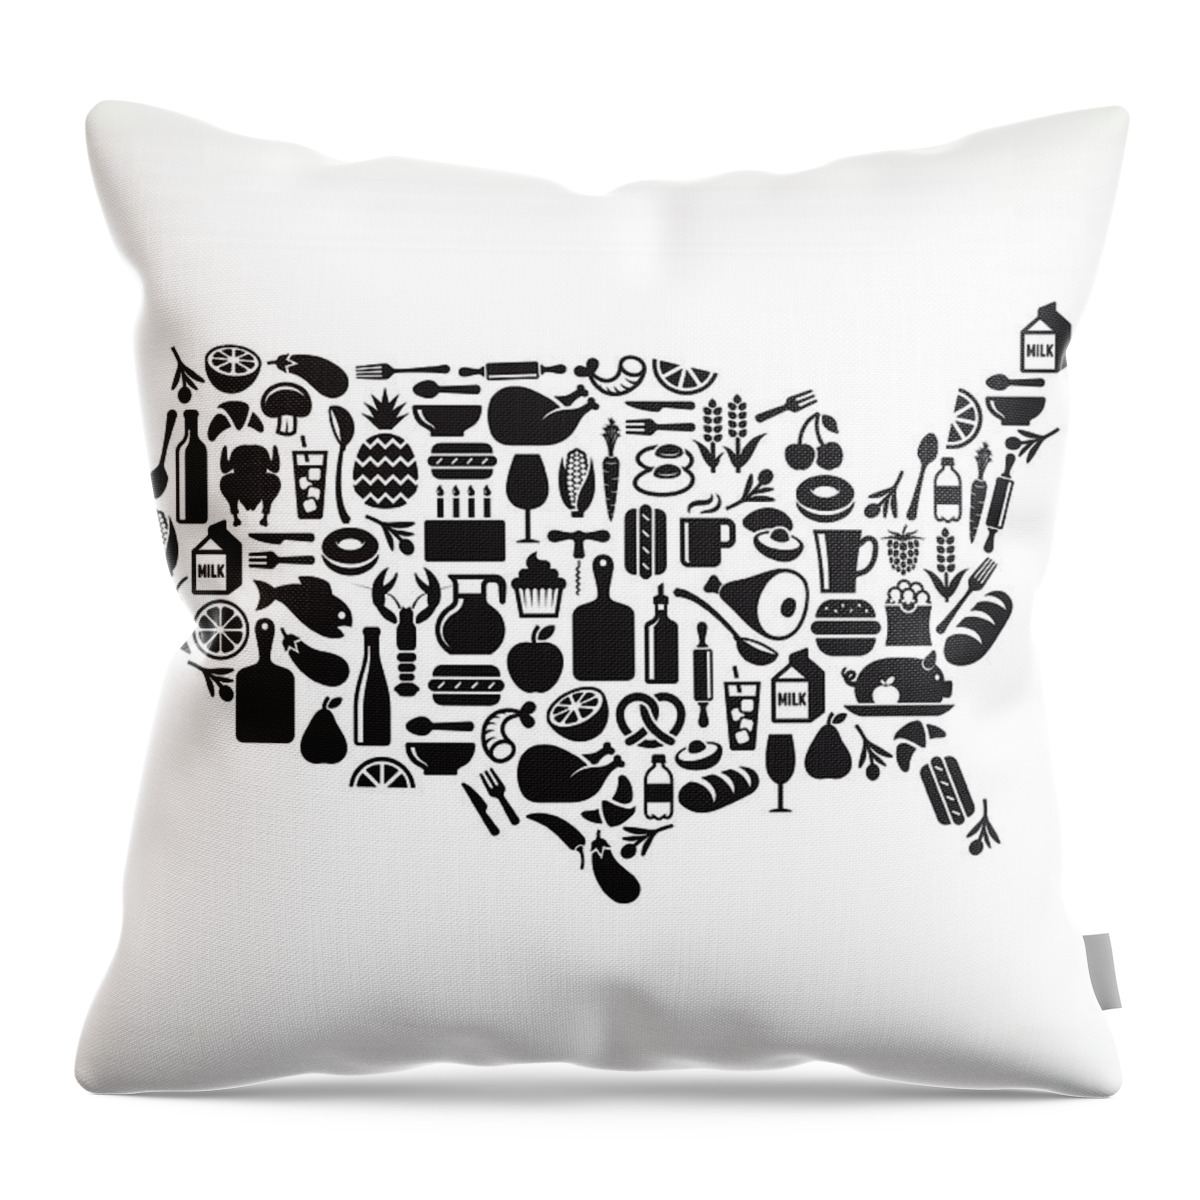 Chicken Meat Throw Pillow featuring the digital art Usa Map Food & Drink Royalty Free by Bubaone